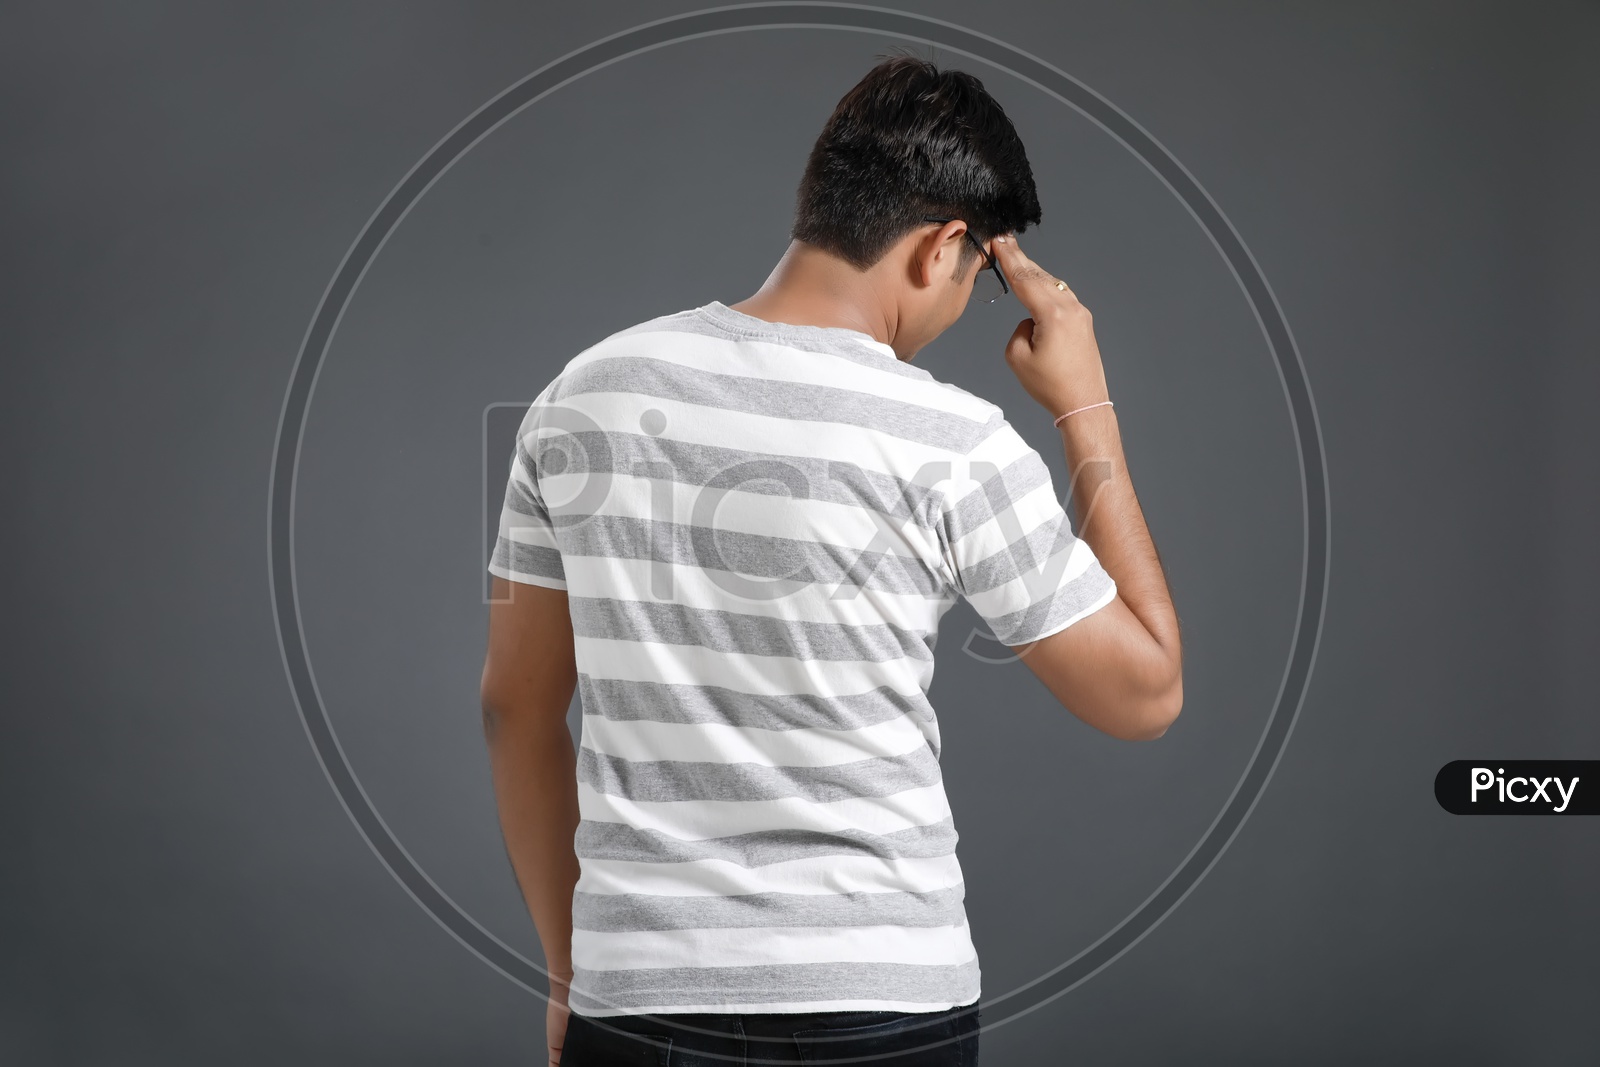 Frustrated Stressed Young Man Holding Head With Hands And Posing Over an Isolated Black Background